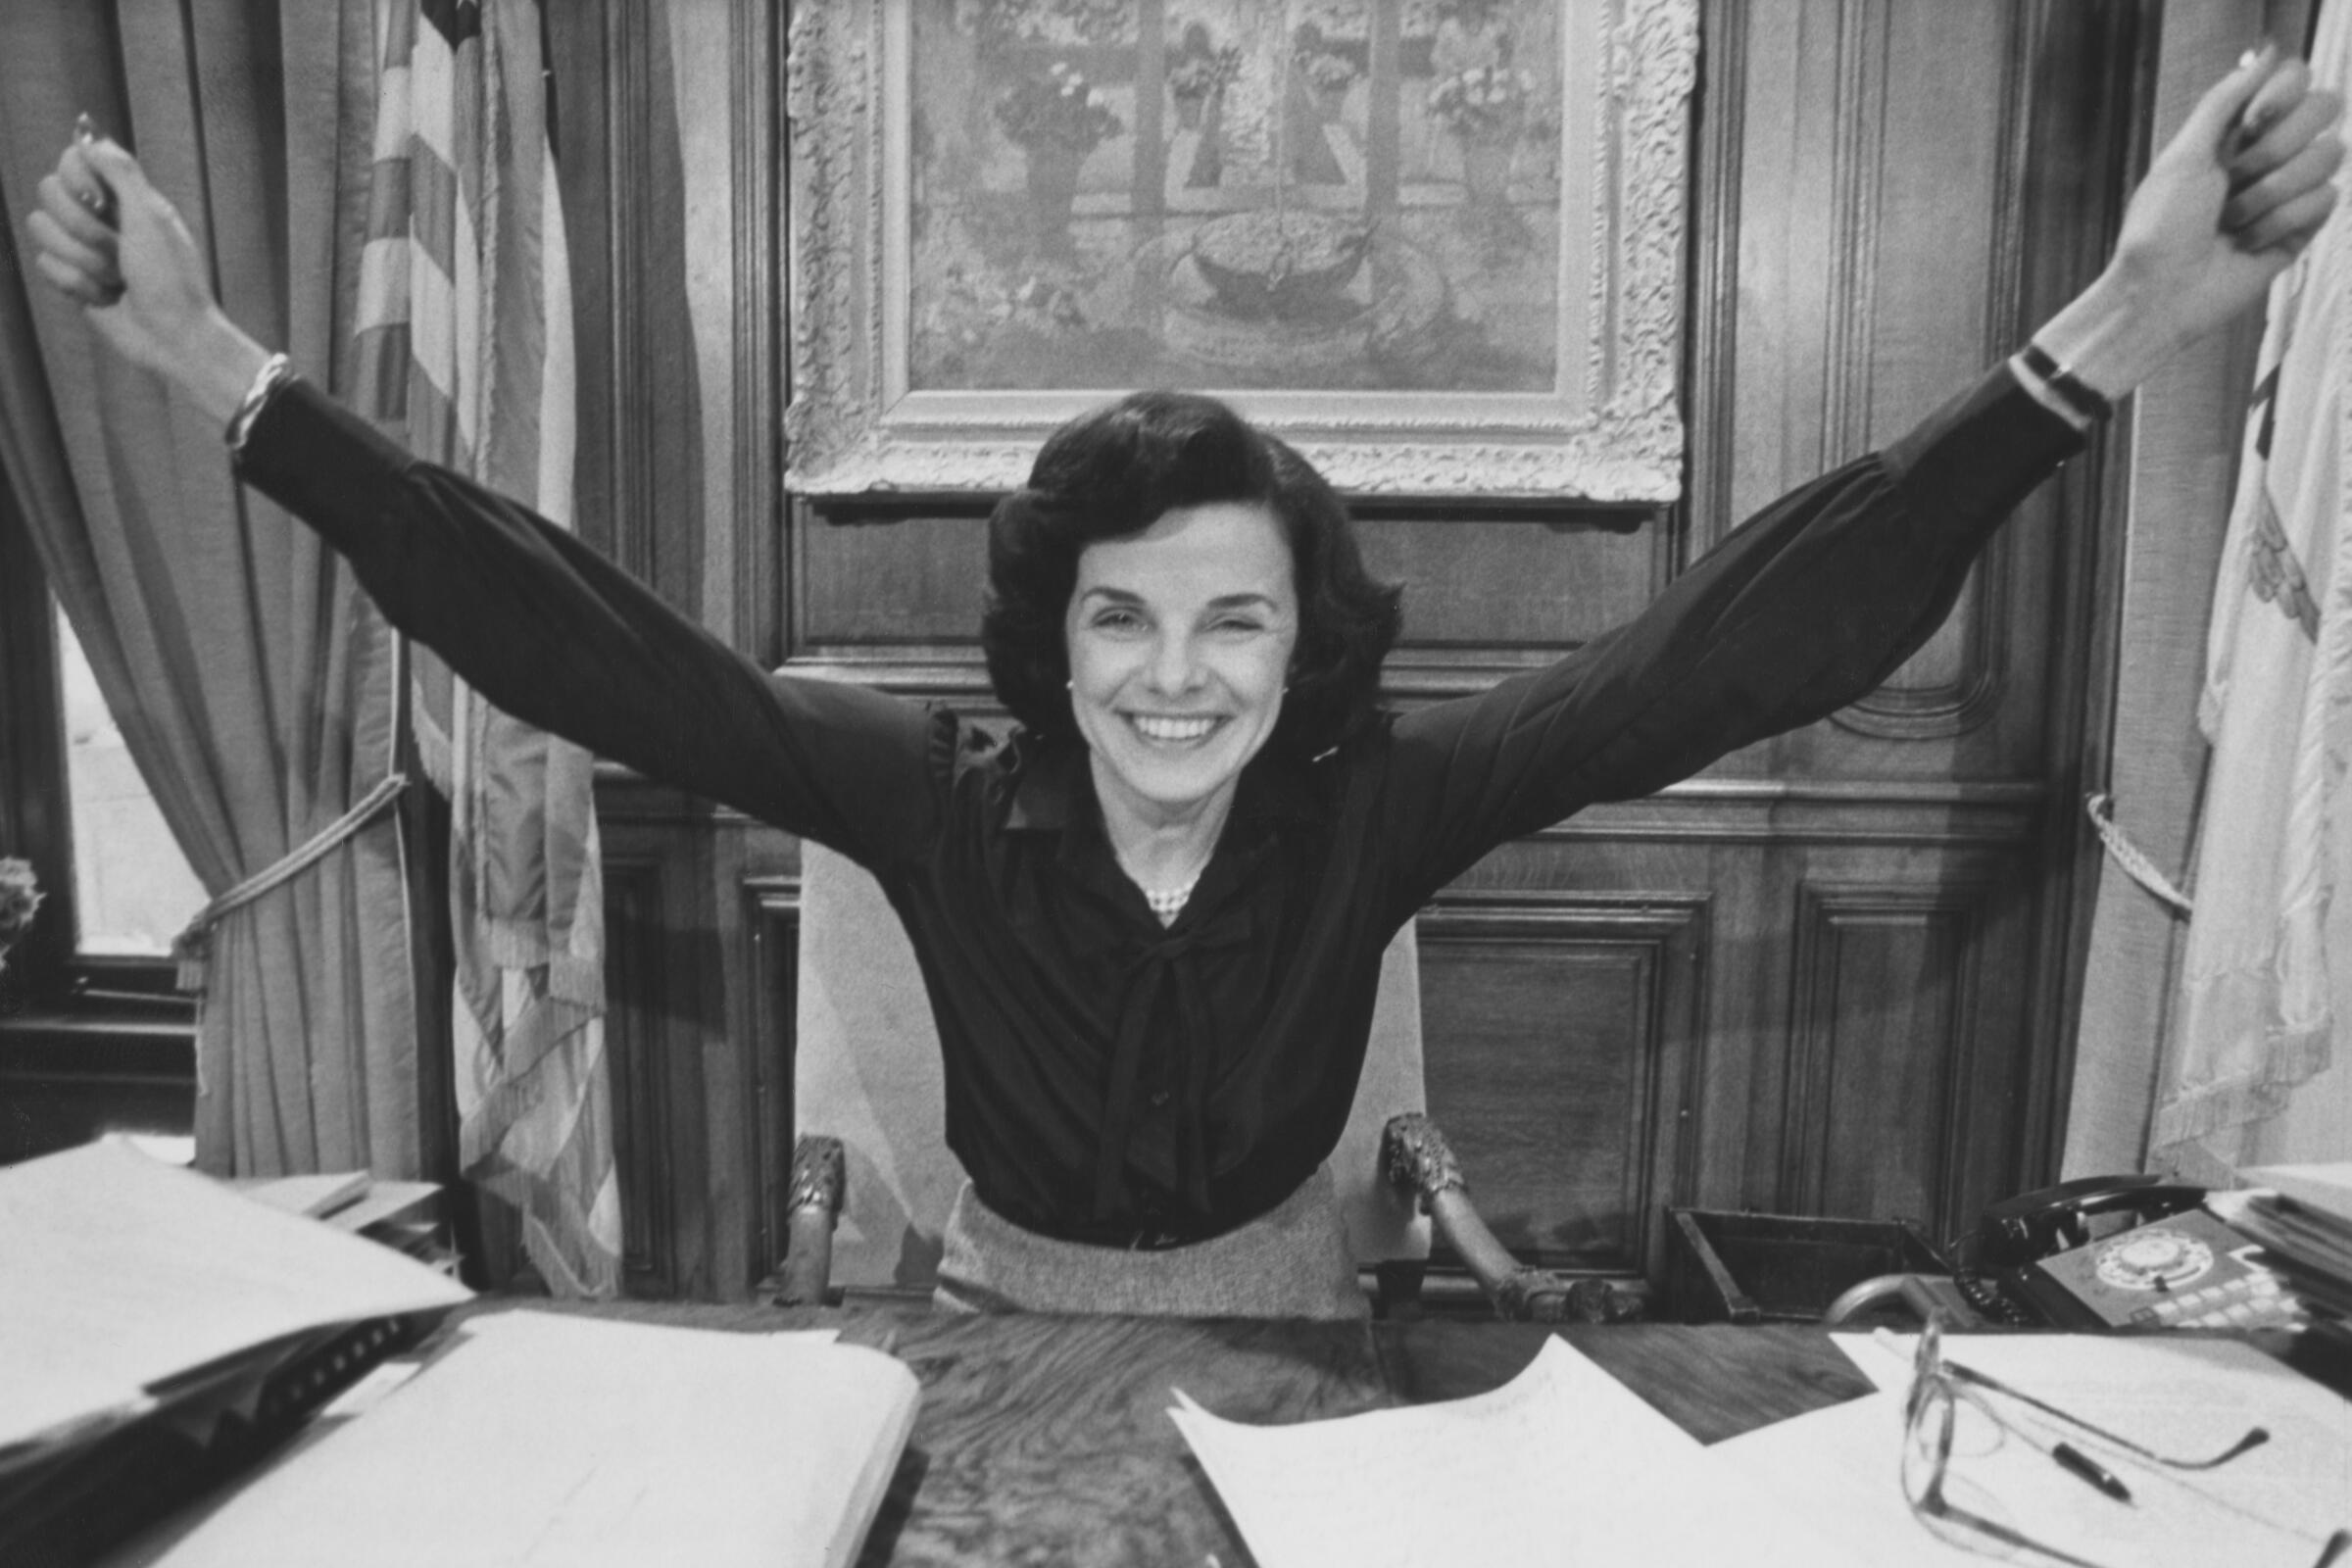 Black-and-white image of Dianne Feinstein, her arms outstretched in celebration, sitting behing a desk in her office.